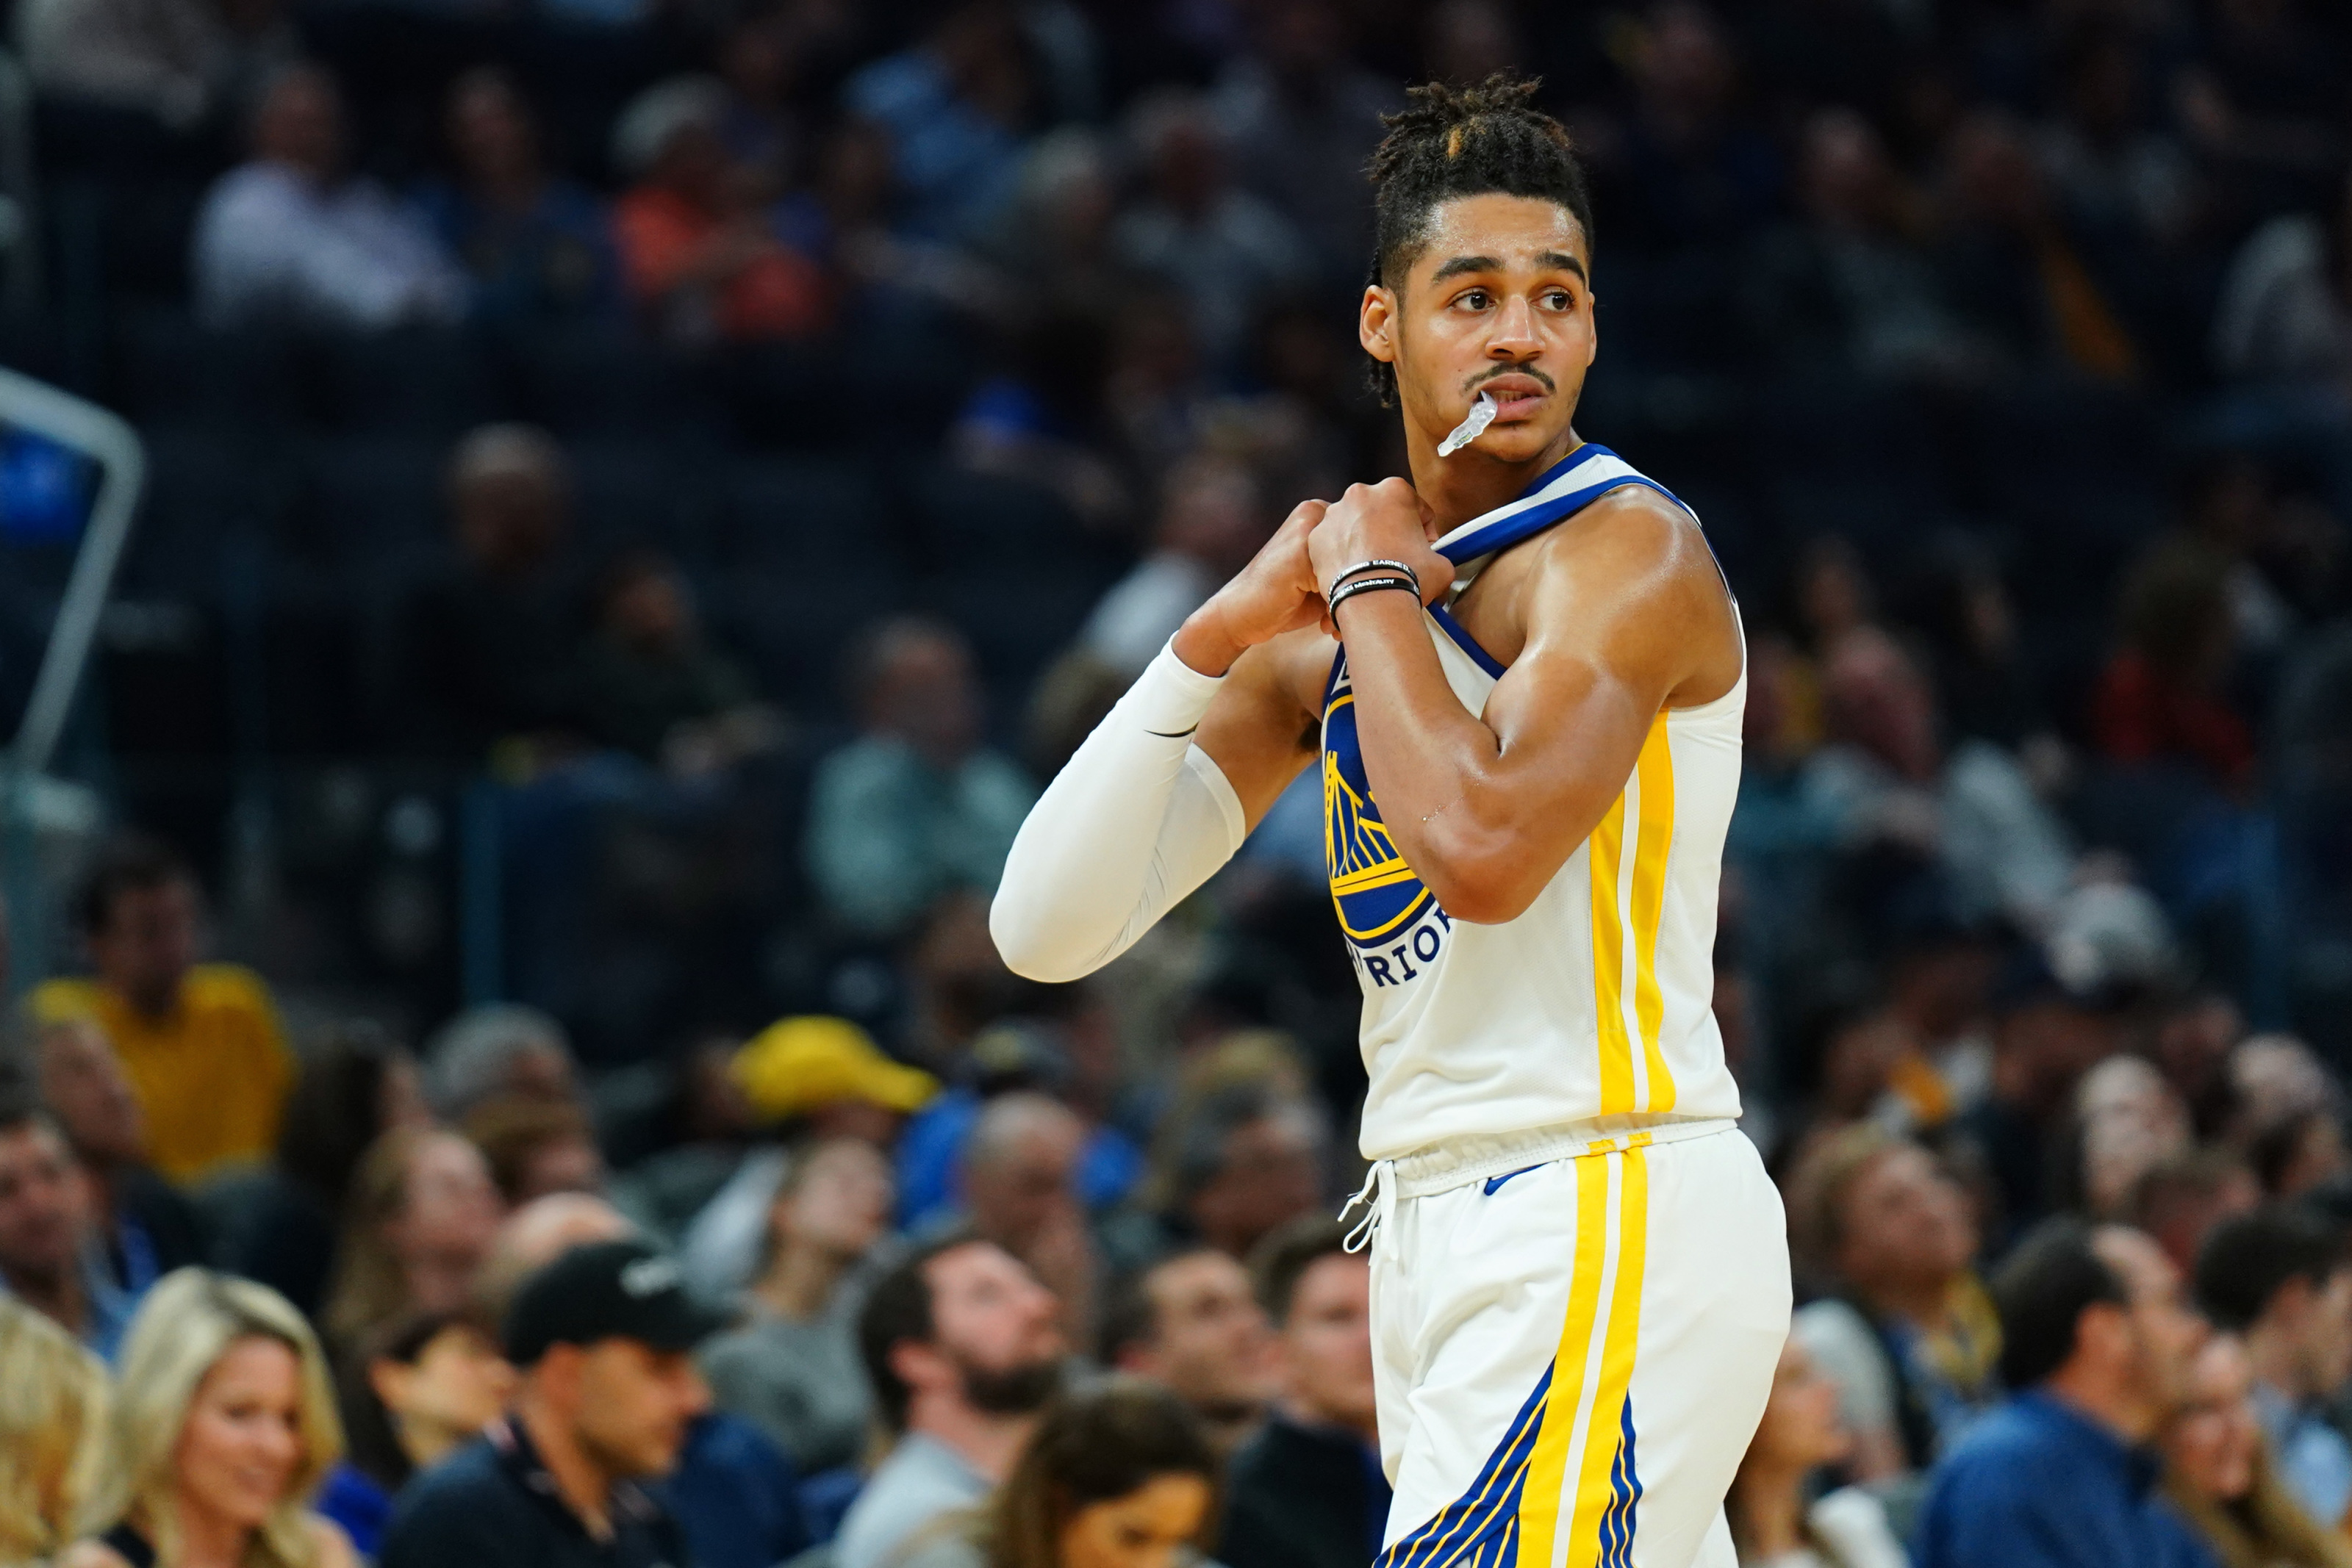 Nylon Calculus Rookie Review: What did the Warriors get from Ky Bowman and Jordan Poole?